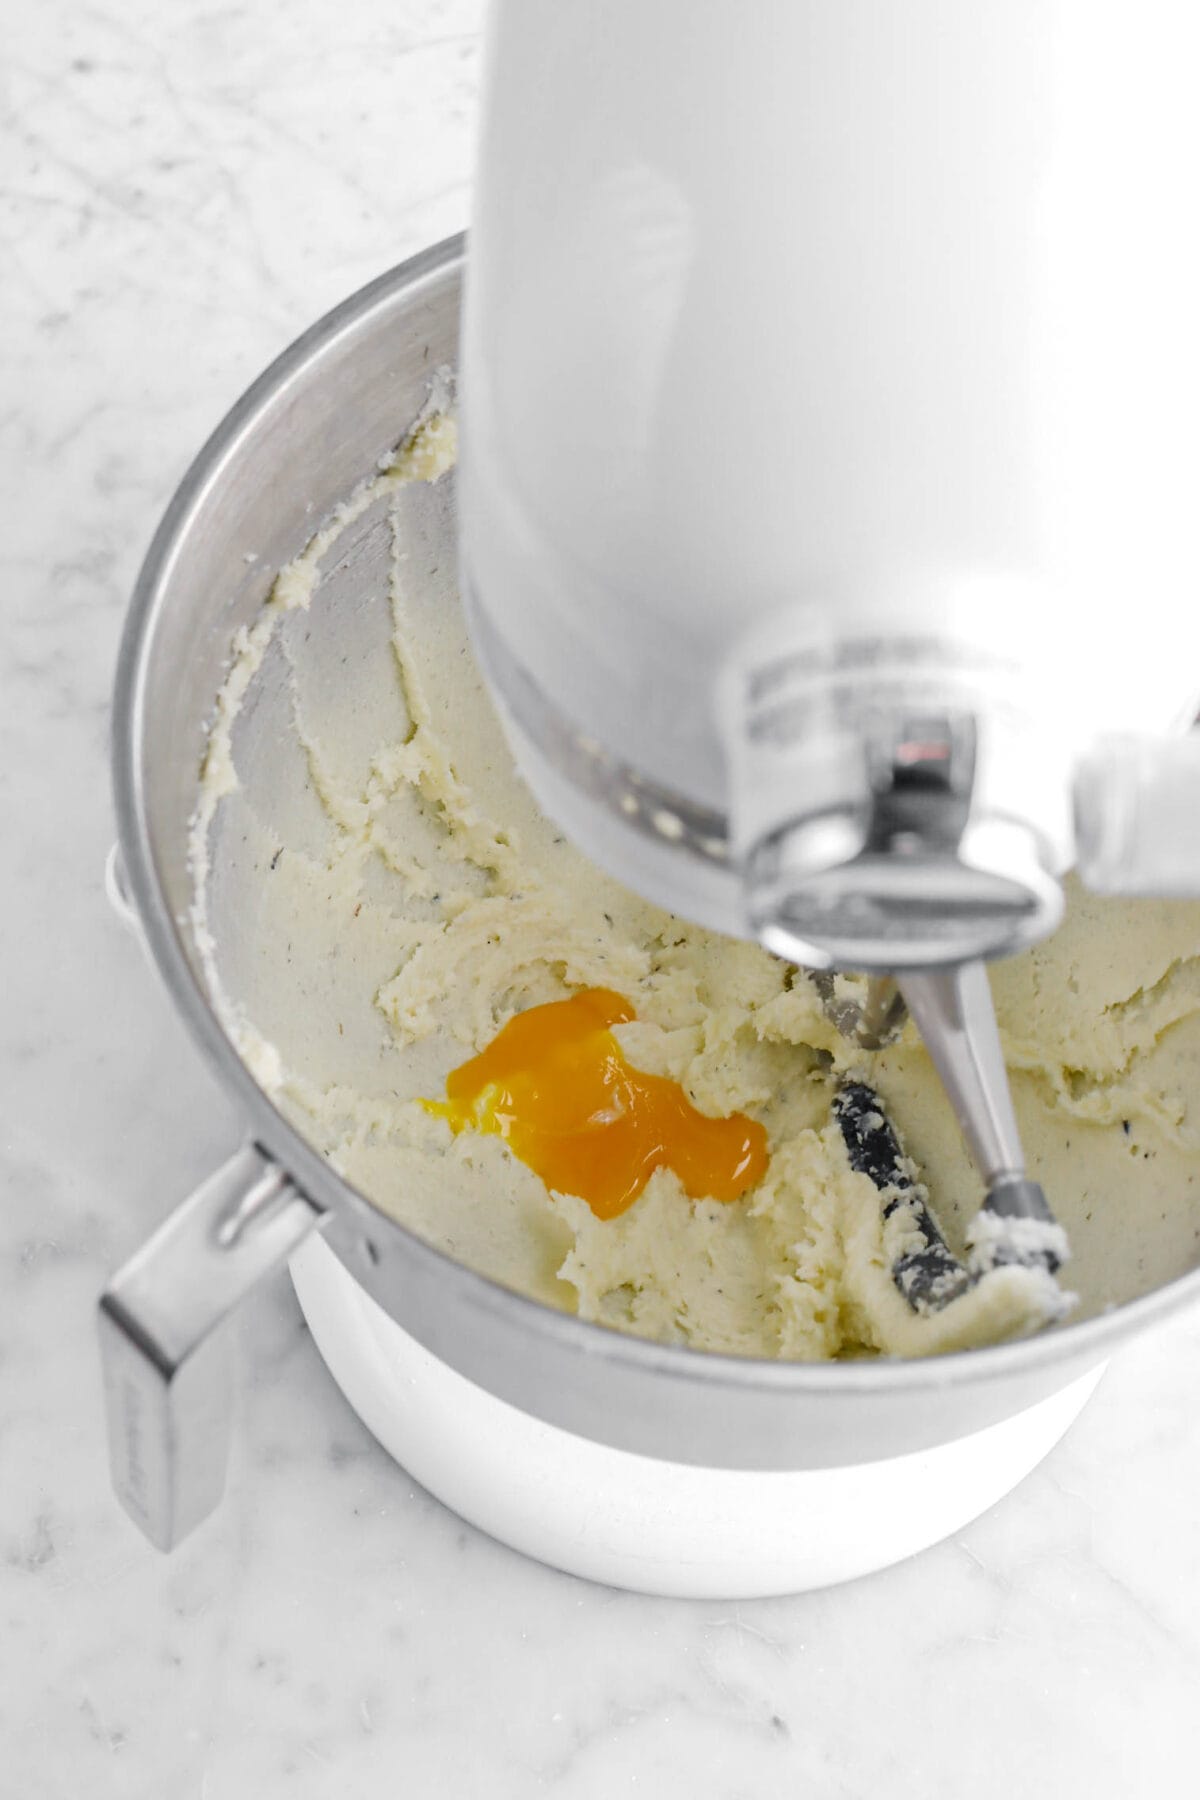 egg yolk added to butter and sugar mixture.